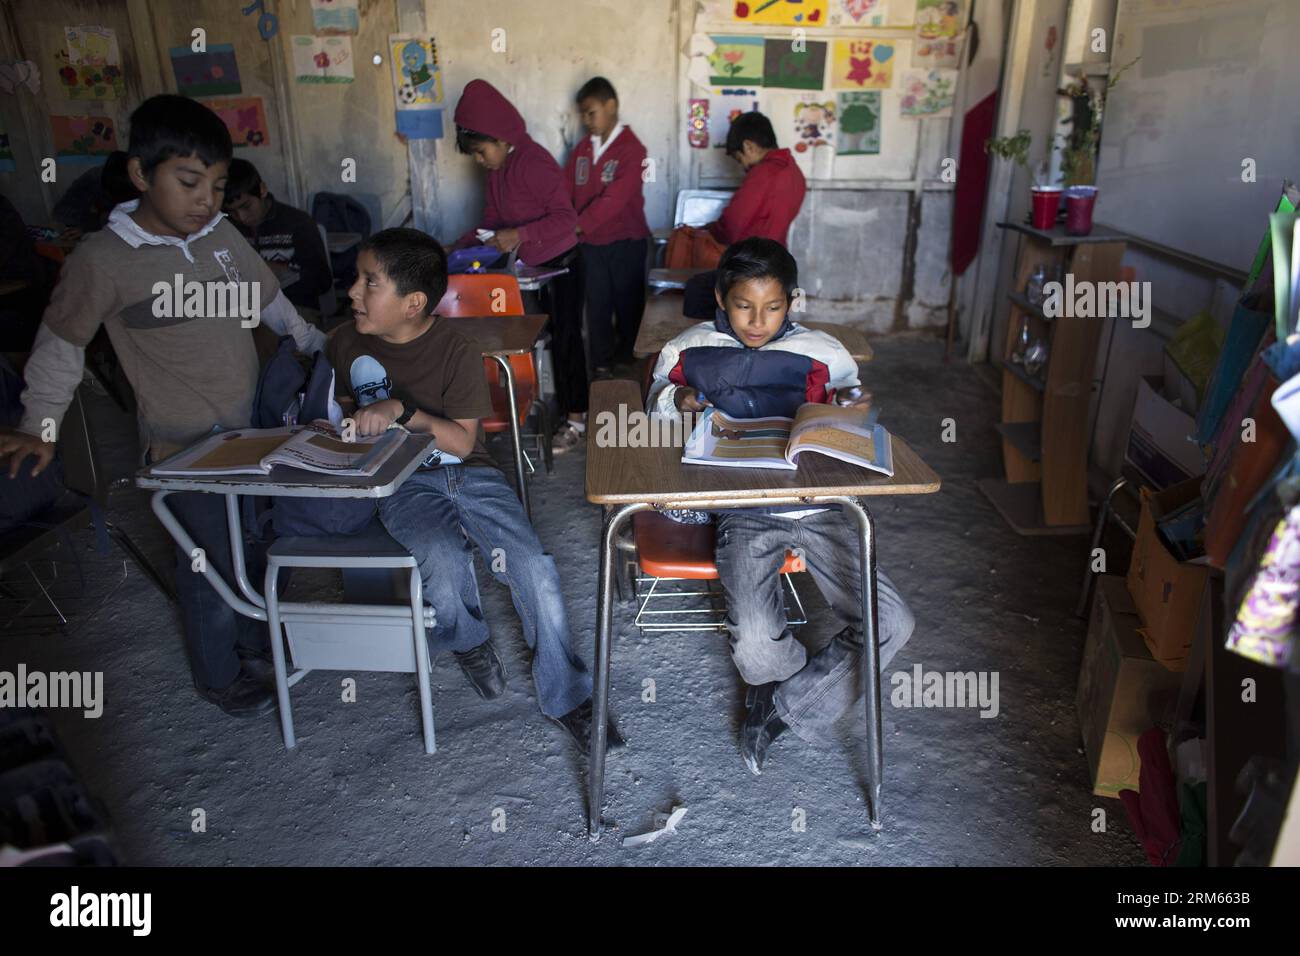 Bildnummer: 60815777  Datum: 10.12.2013  Copyright: imago/Xinhua     TIJUANA,  -- Photo shows children studying inside their classroom in the The New Hope school in Tijuana, northwest Mexico. The school New Hope , which was just opened two months ago, has 51 students from 1st until sixth grade of elementary school. It is supported by the National Educational Development Council, the only official institution that gives them didactic material and a monthly economic stimulus of 1900 pesos, for the two teachers in the school. The school was built by the students parents, with waste materials. Tha Stock Photo